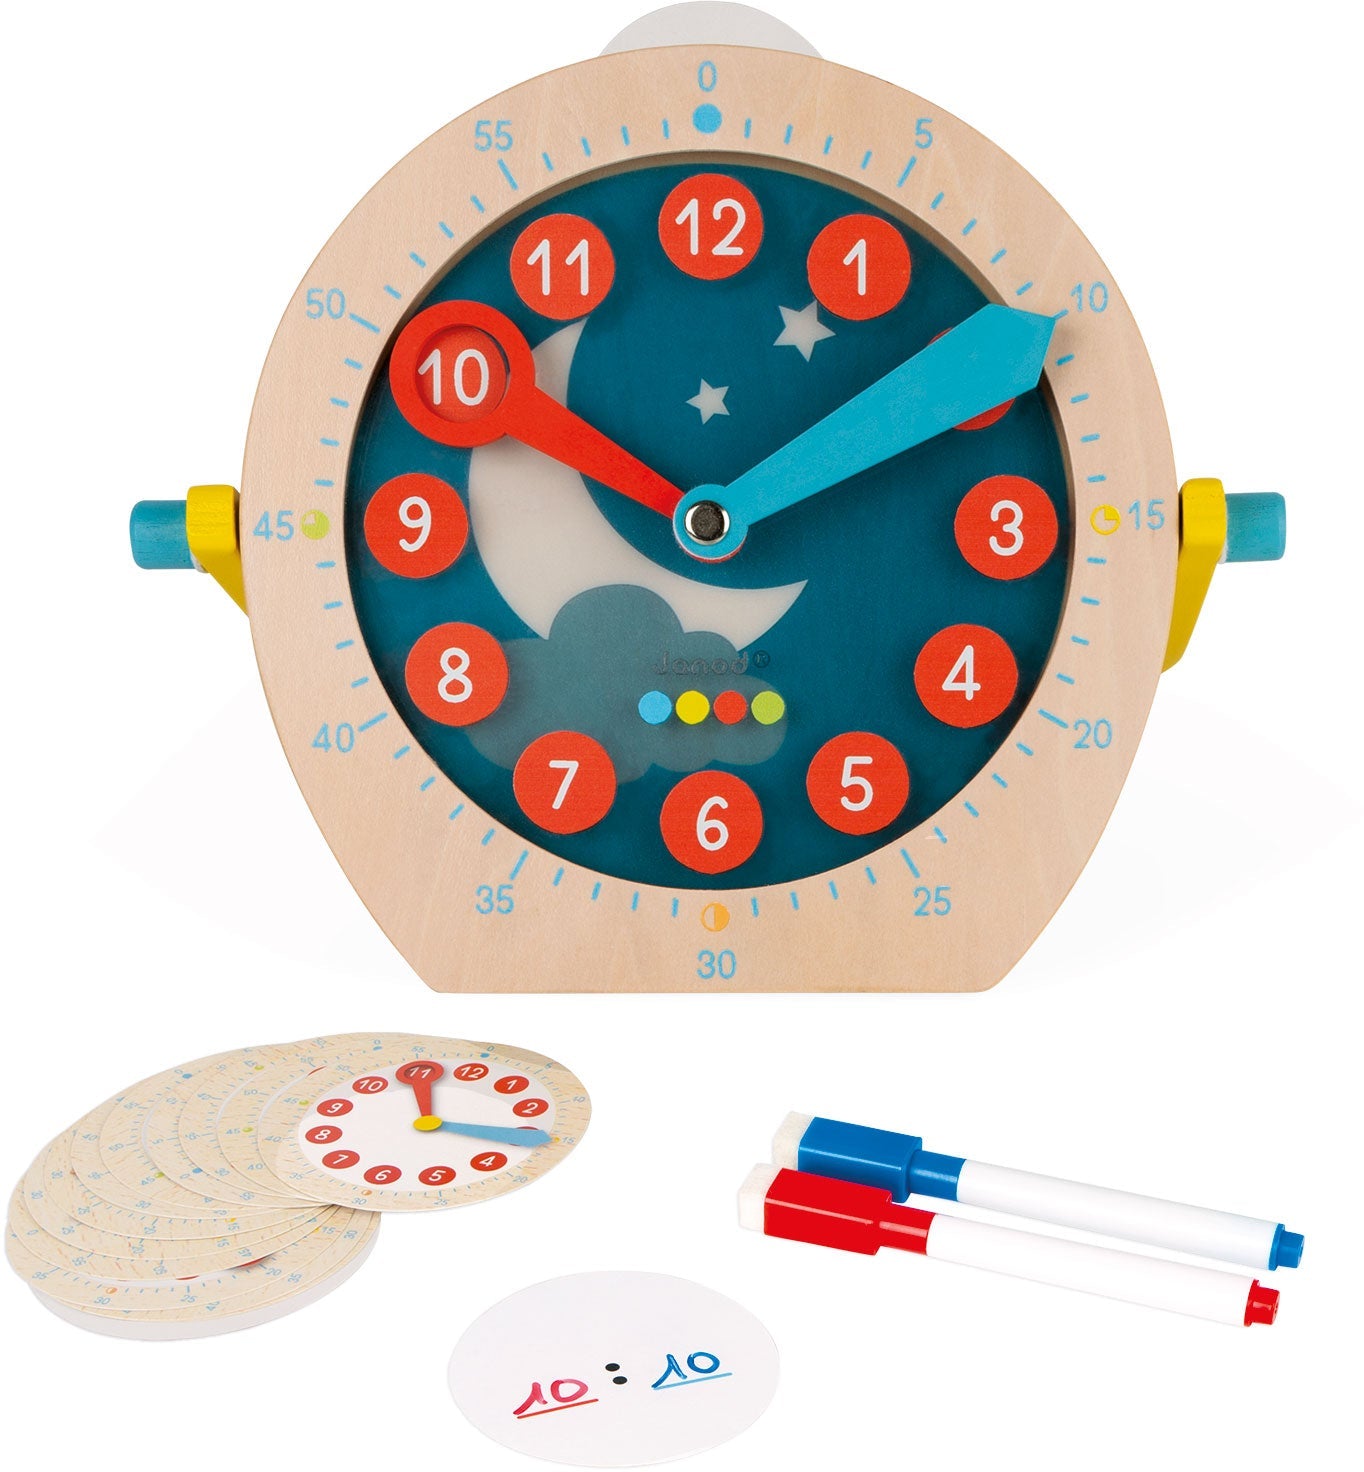 Learn to Tell The Time Activity Toy Set - Janod